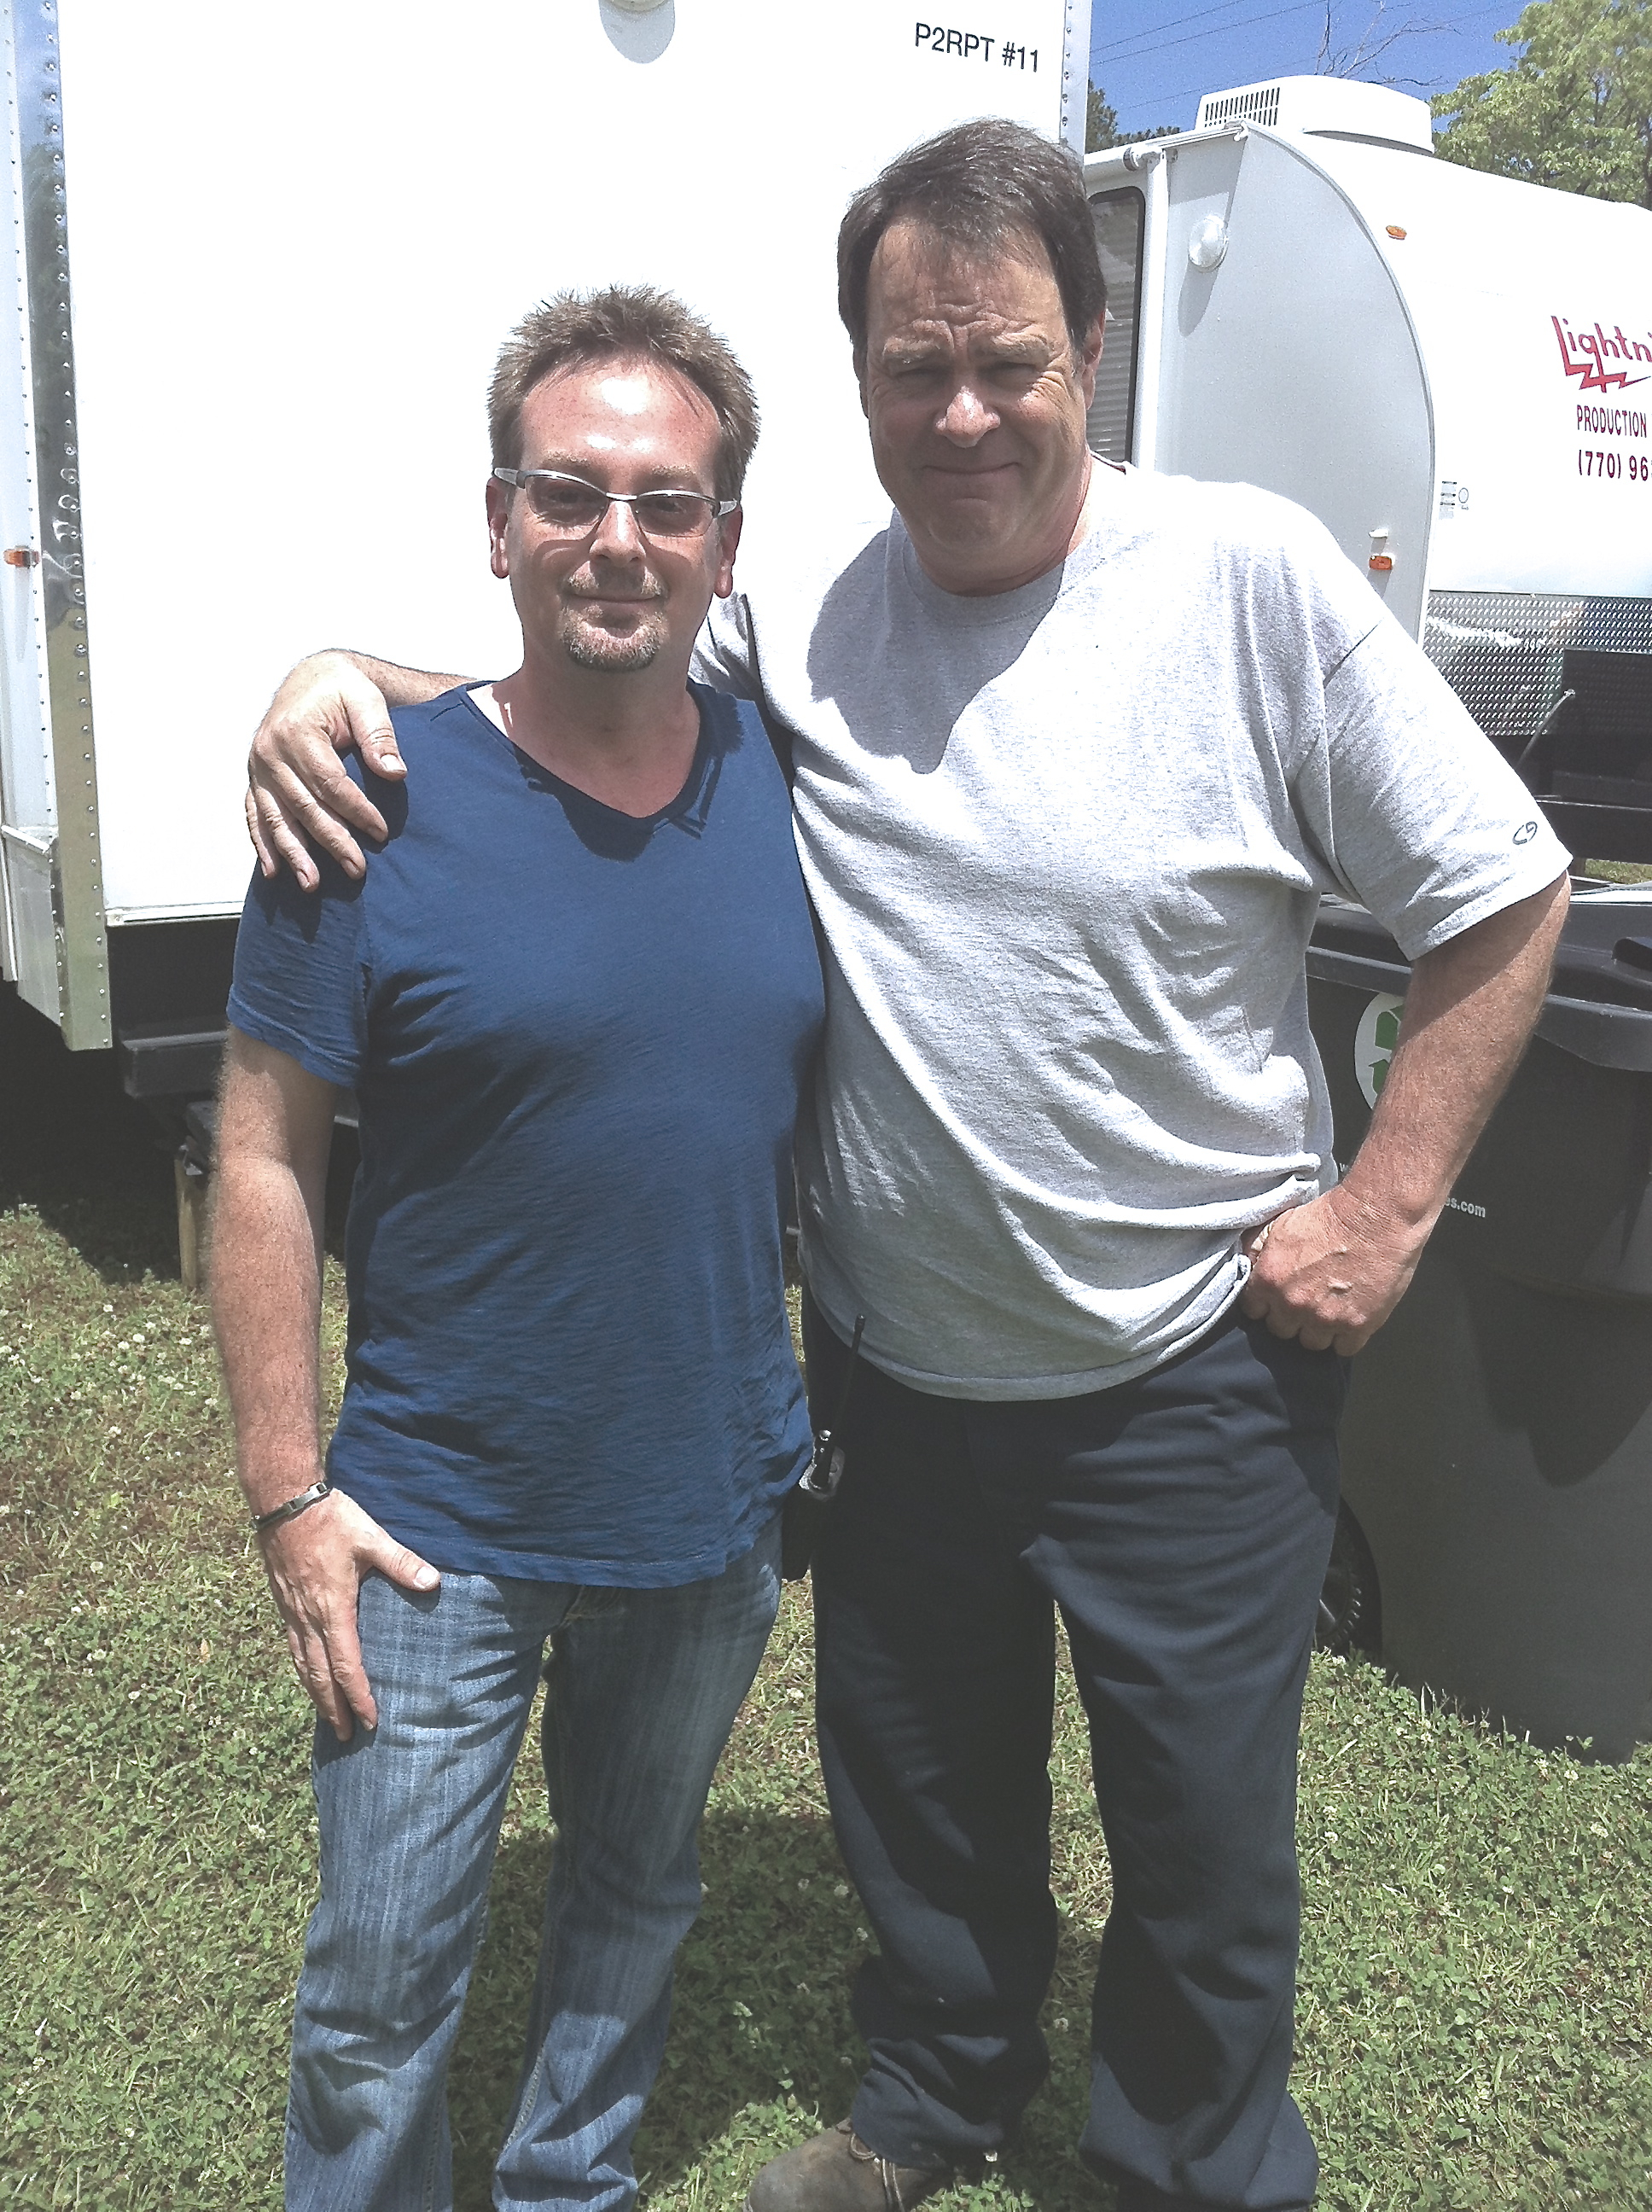 Location Manager Mike Hewett and Dan Aykroyd on location in Wilmington, N.C. for the upcoming feature film 